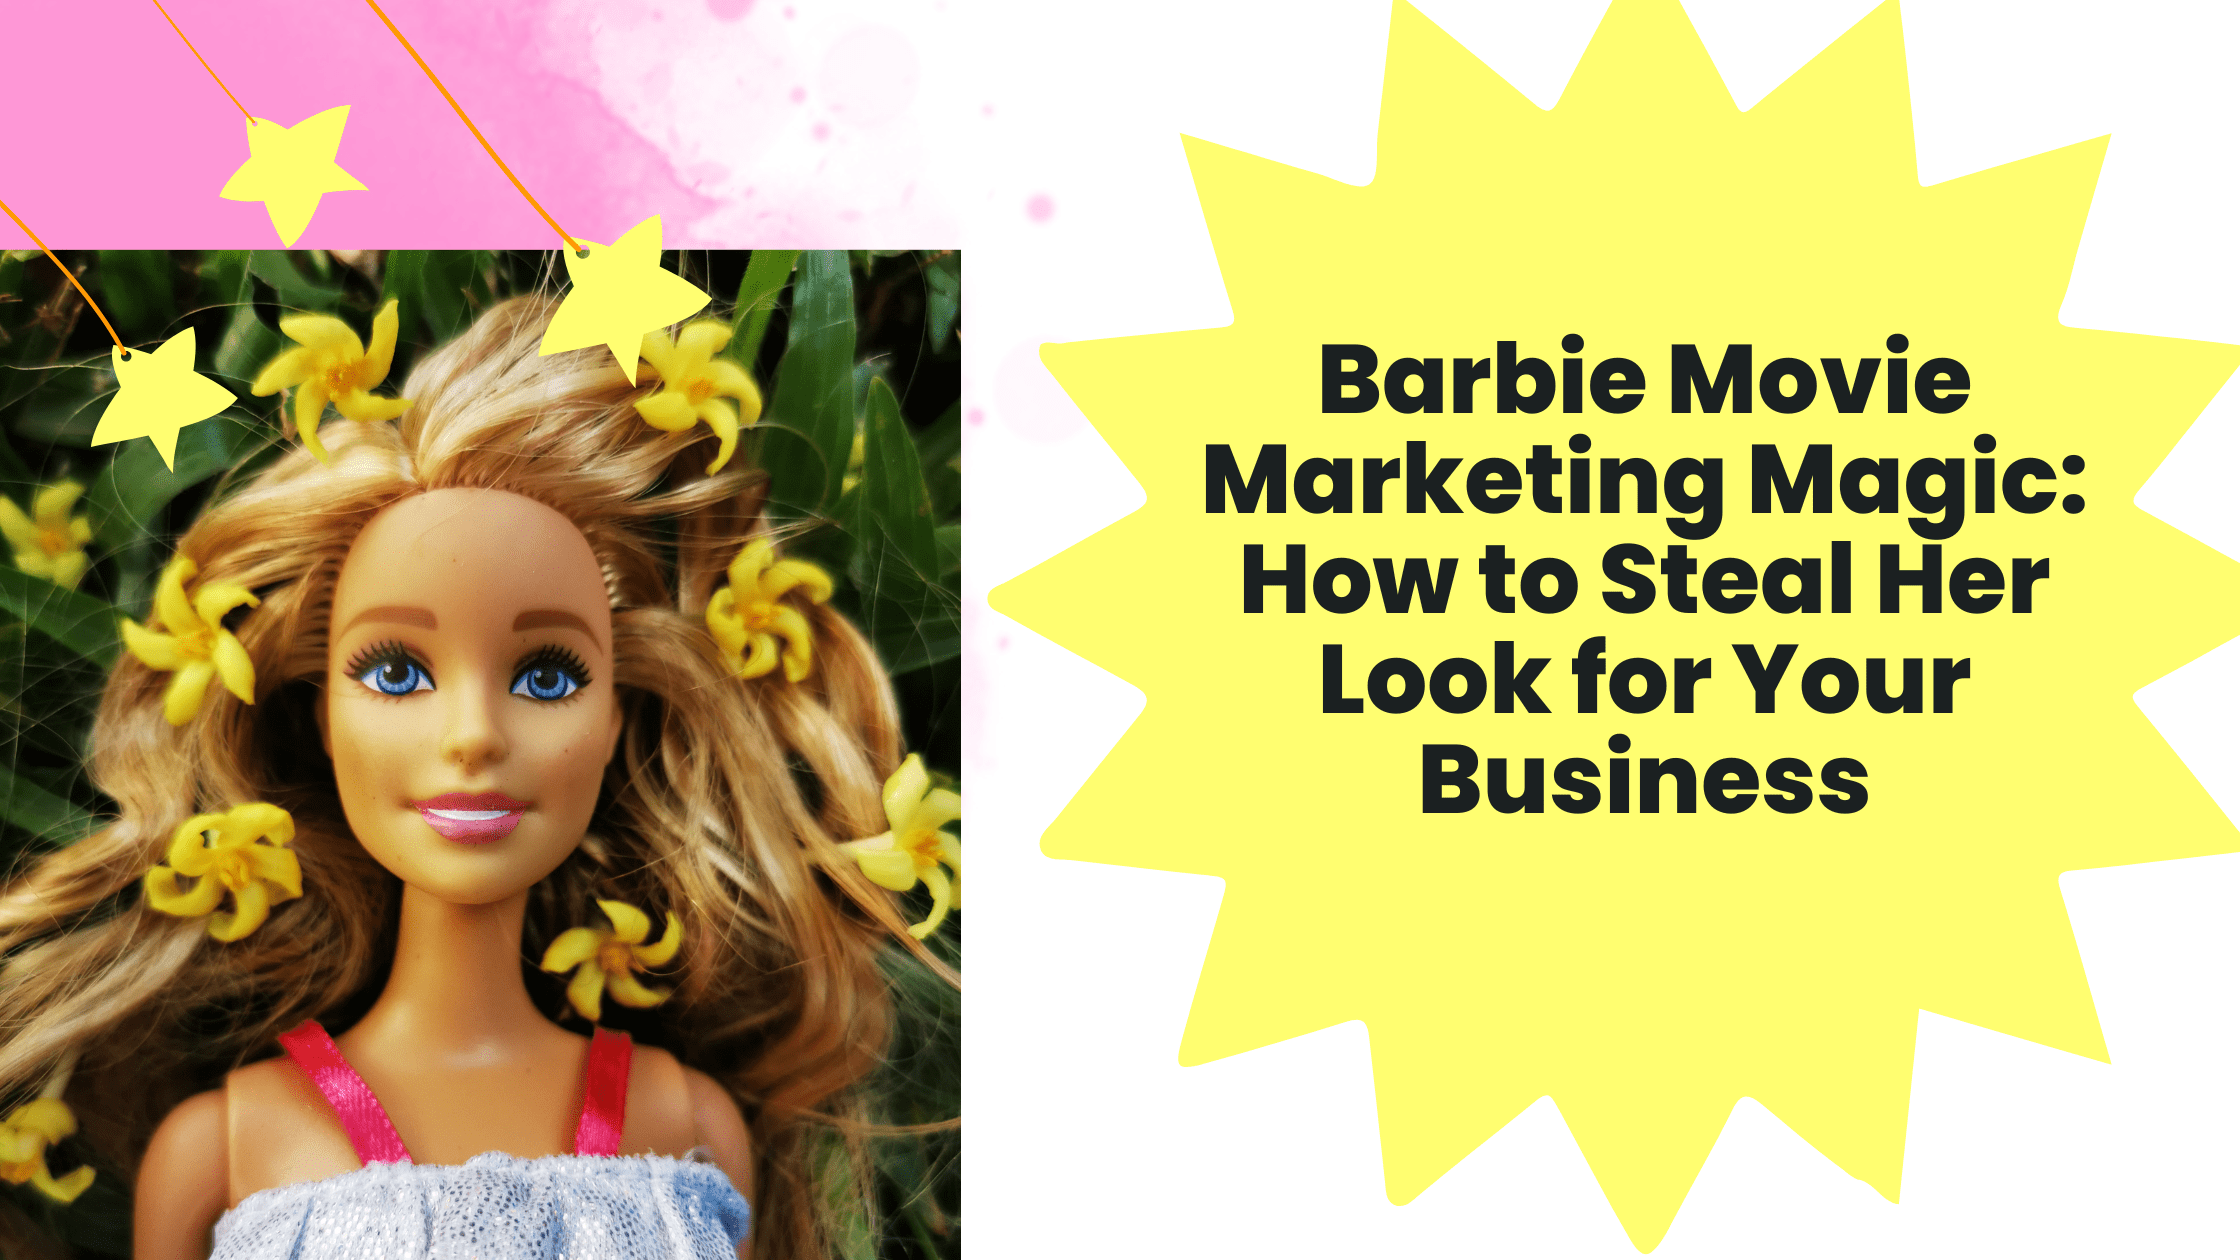 Barbie Movie Marketing Magic for Your Business